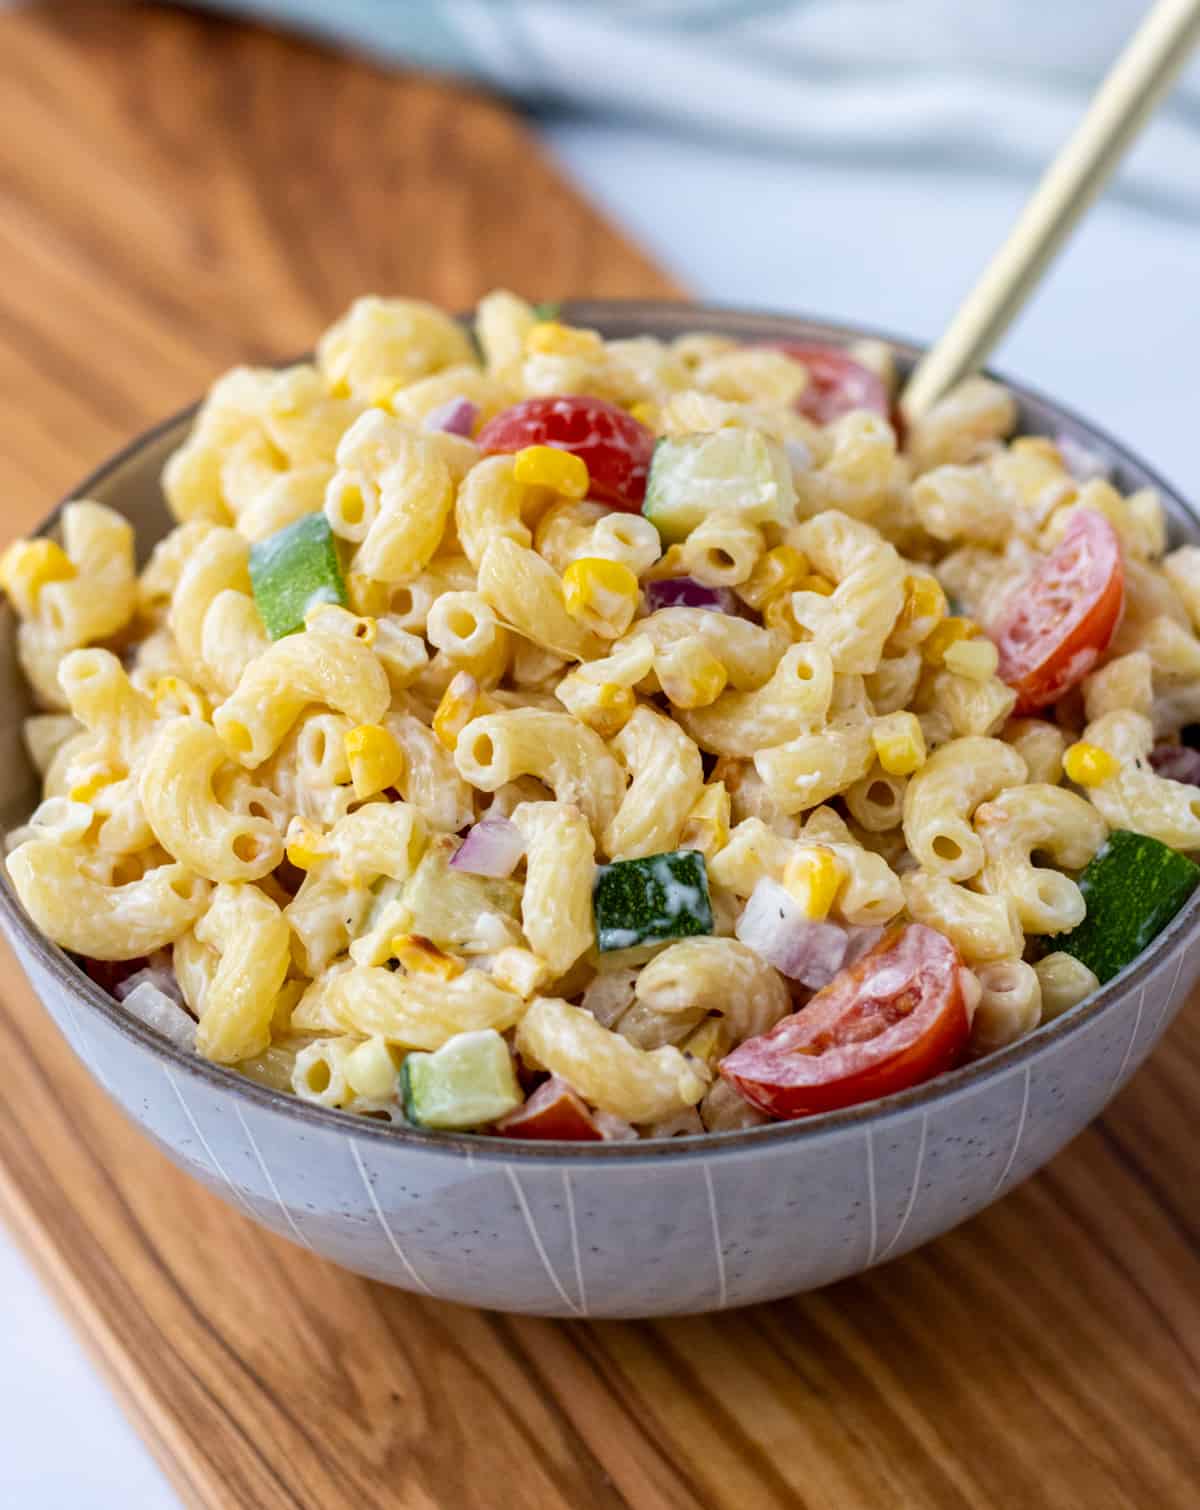 Creamy corn and zucchini pasta salad in a bowl with a spoon on top of a wood board.